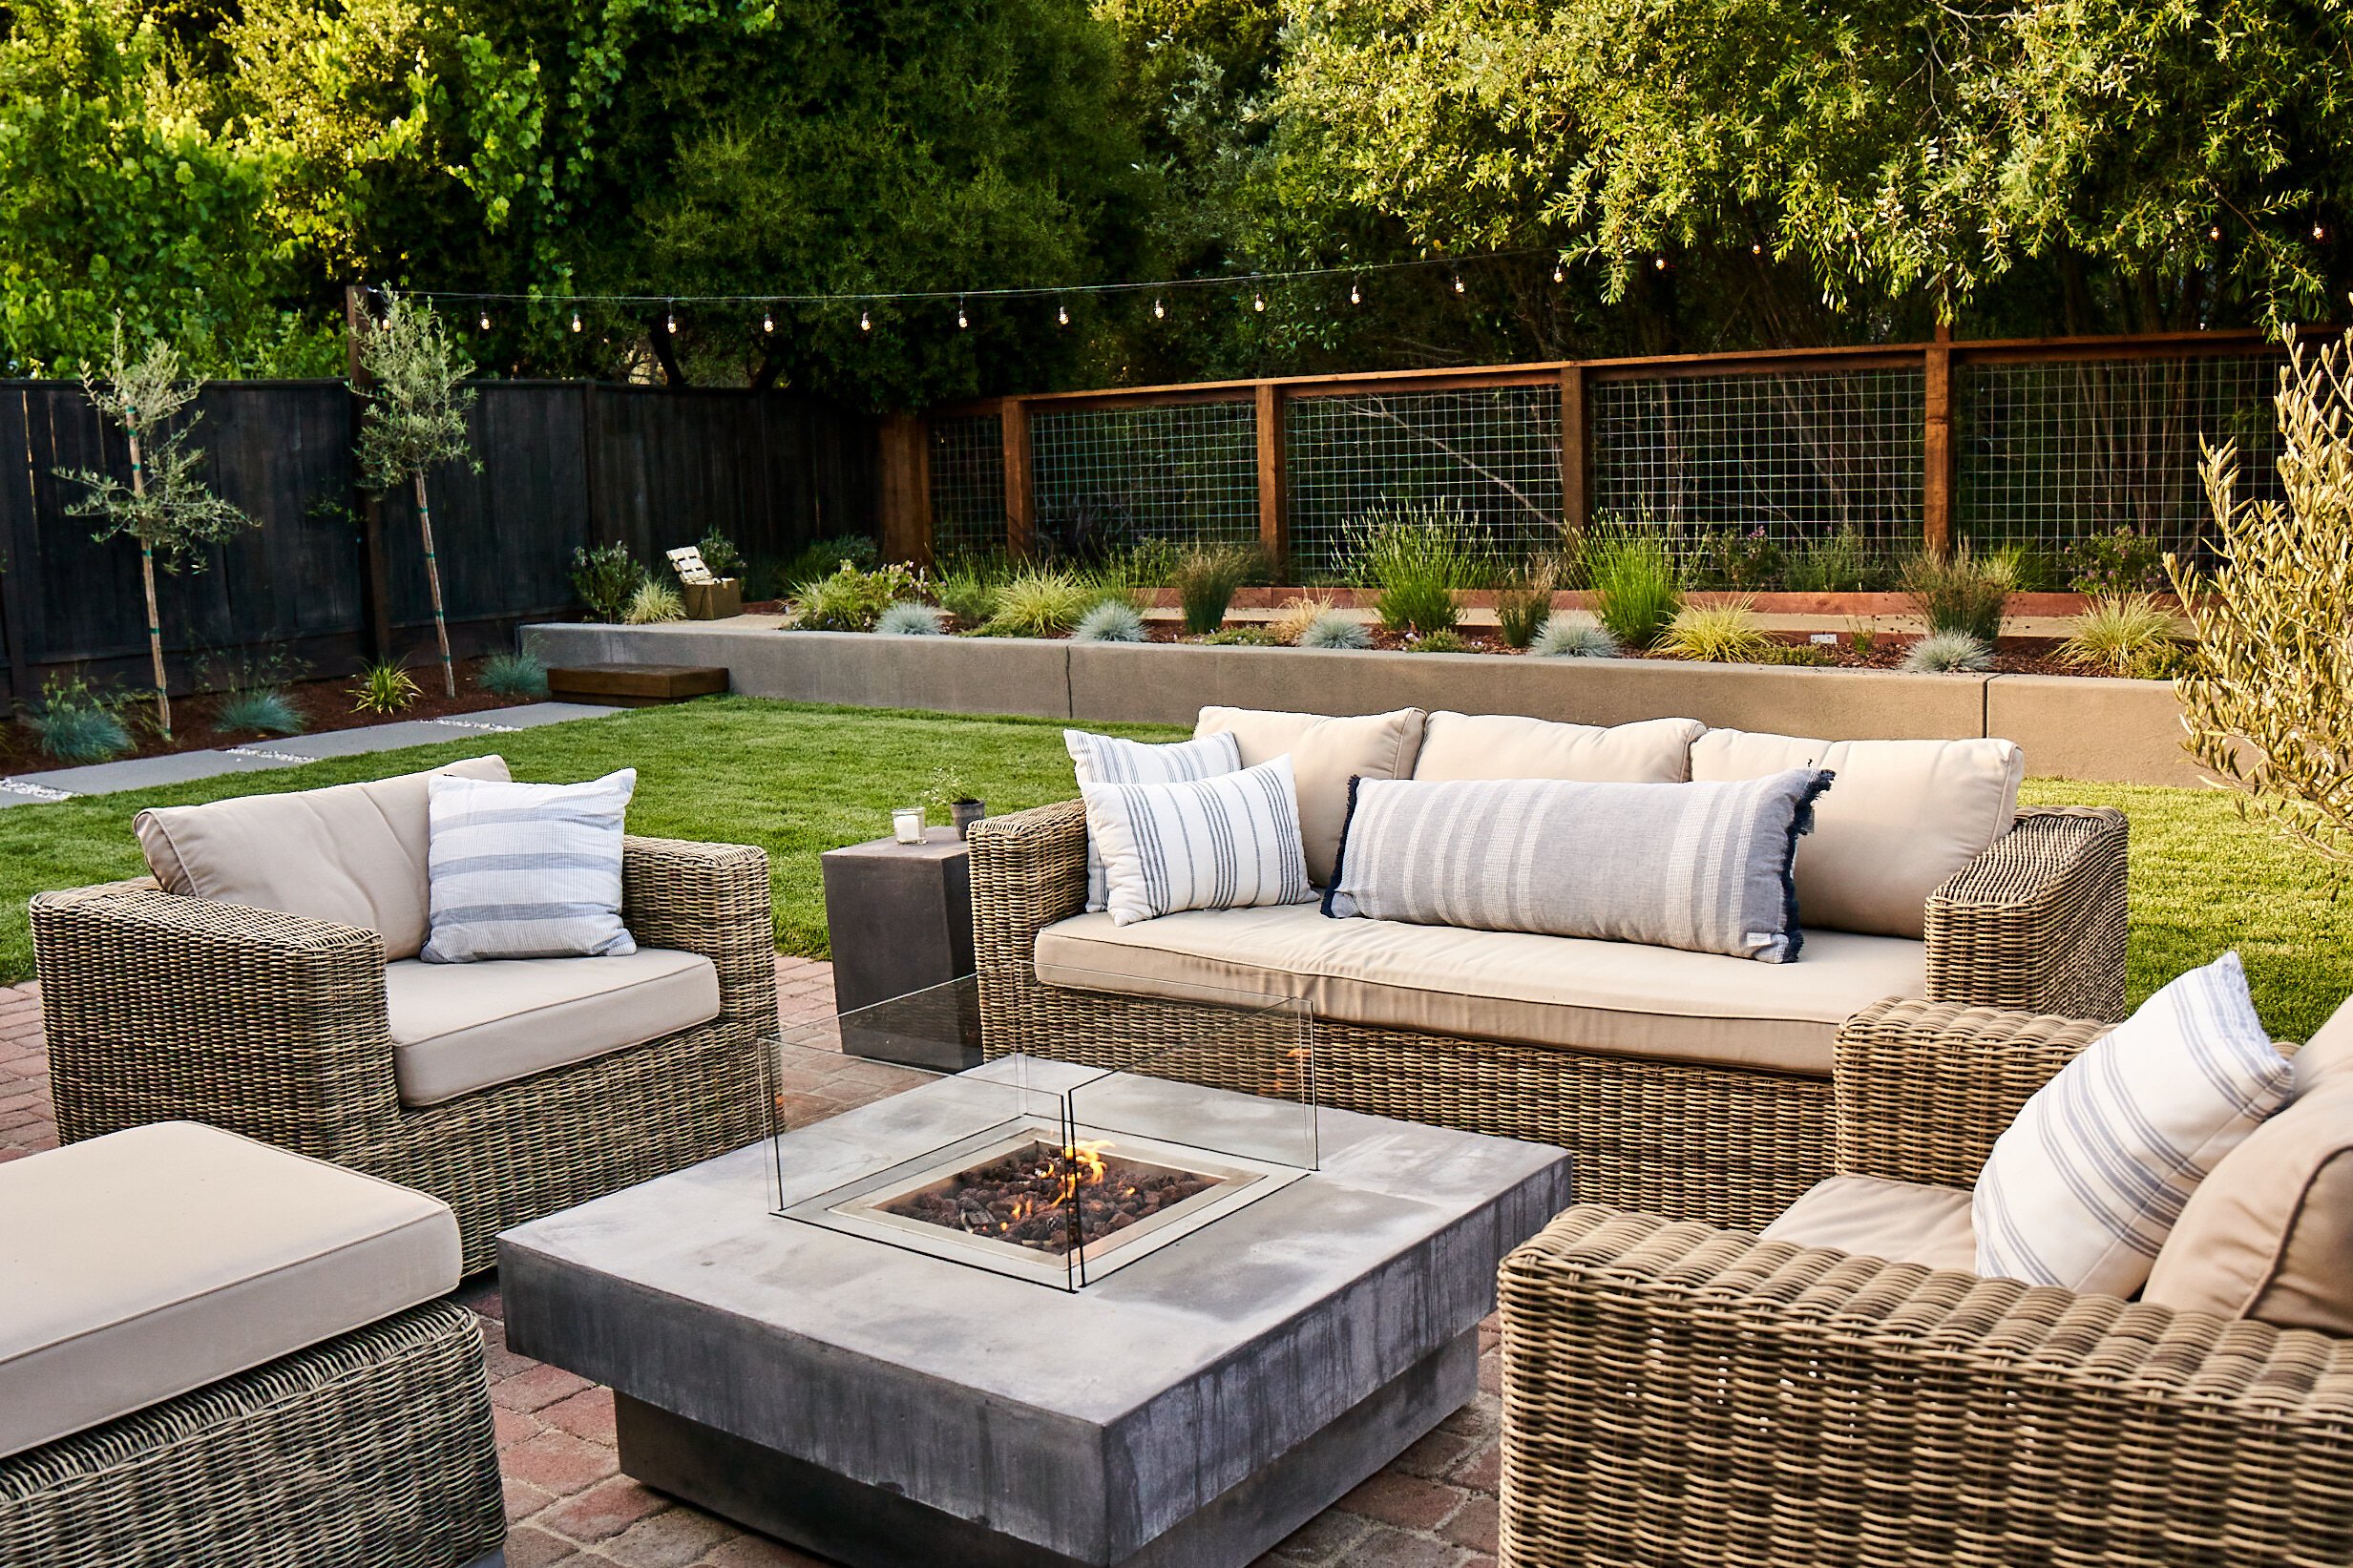 Outdoor fire pit area with comfortable outdoor couch and club chairs